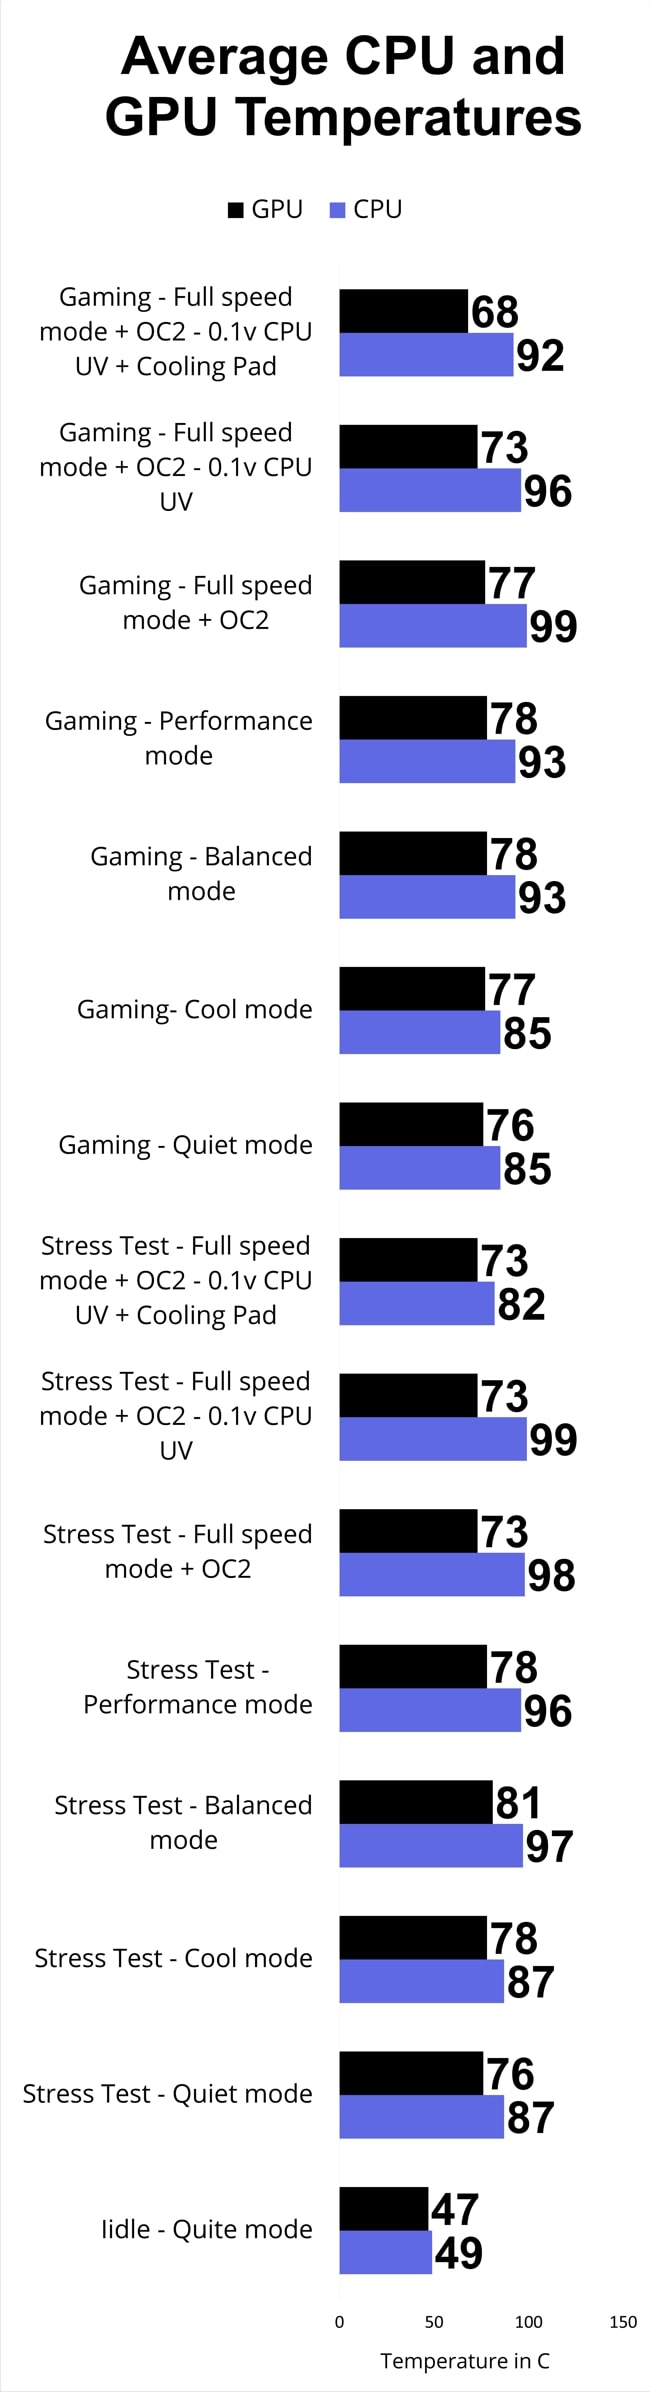 The chart of the average CPU and GPU temperature for gaming and stress tests in different modes on the Alienware m15 r2 gaming laptop.